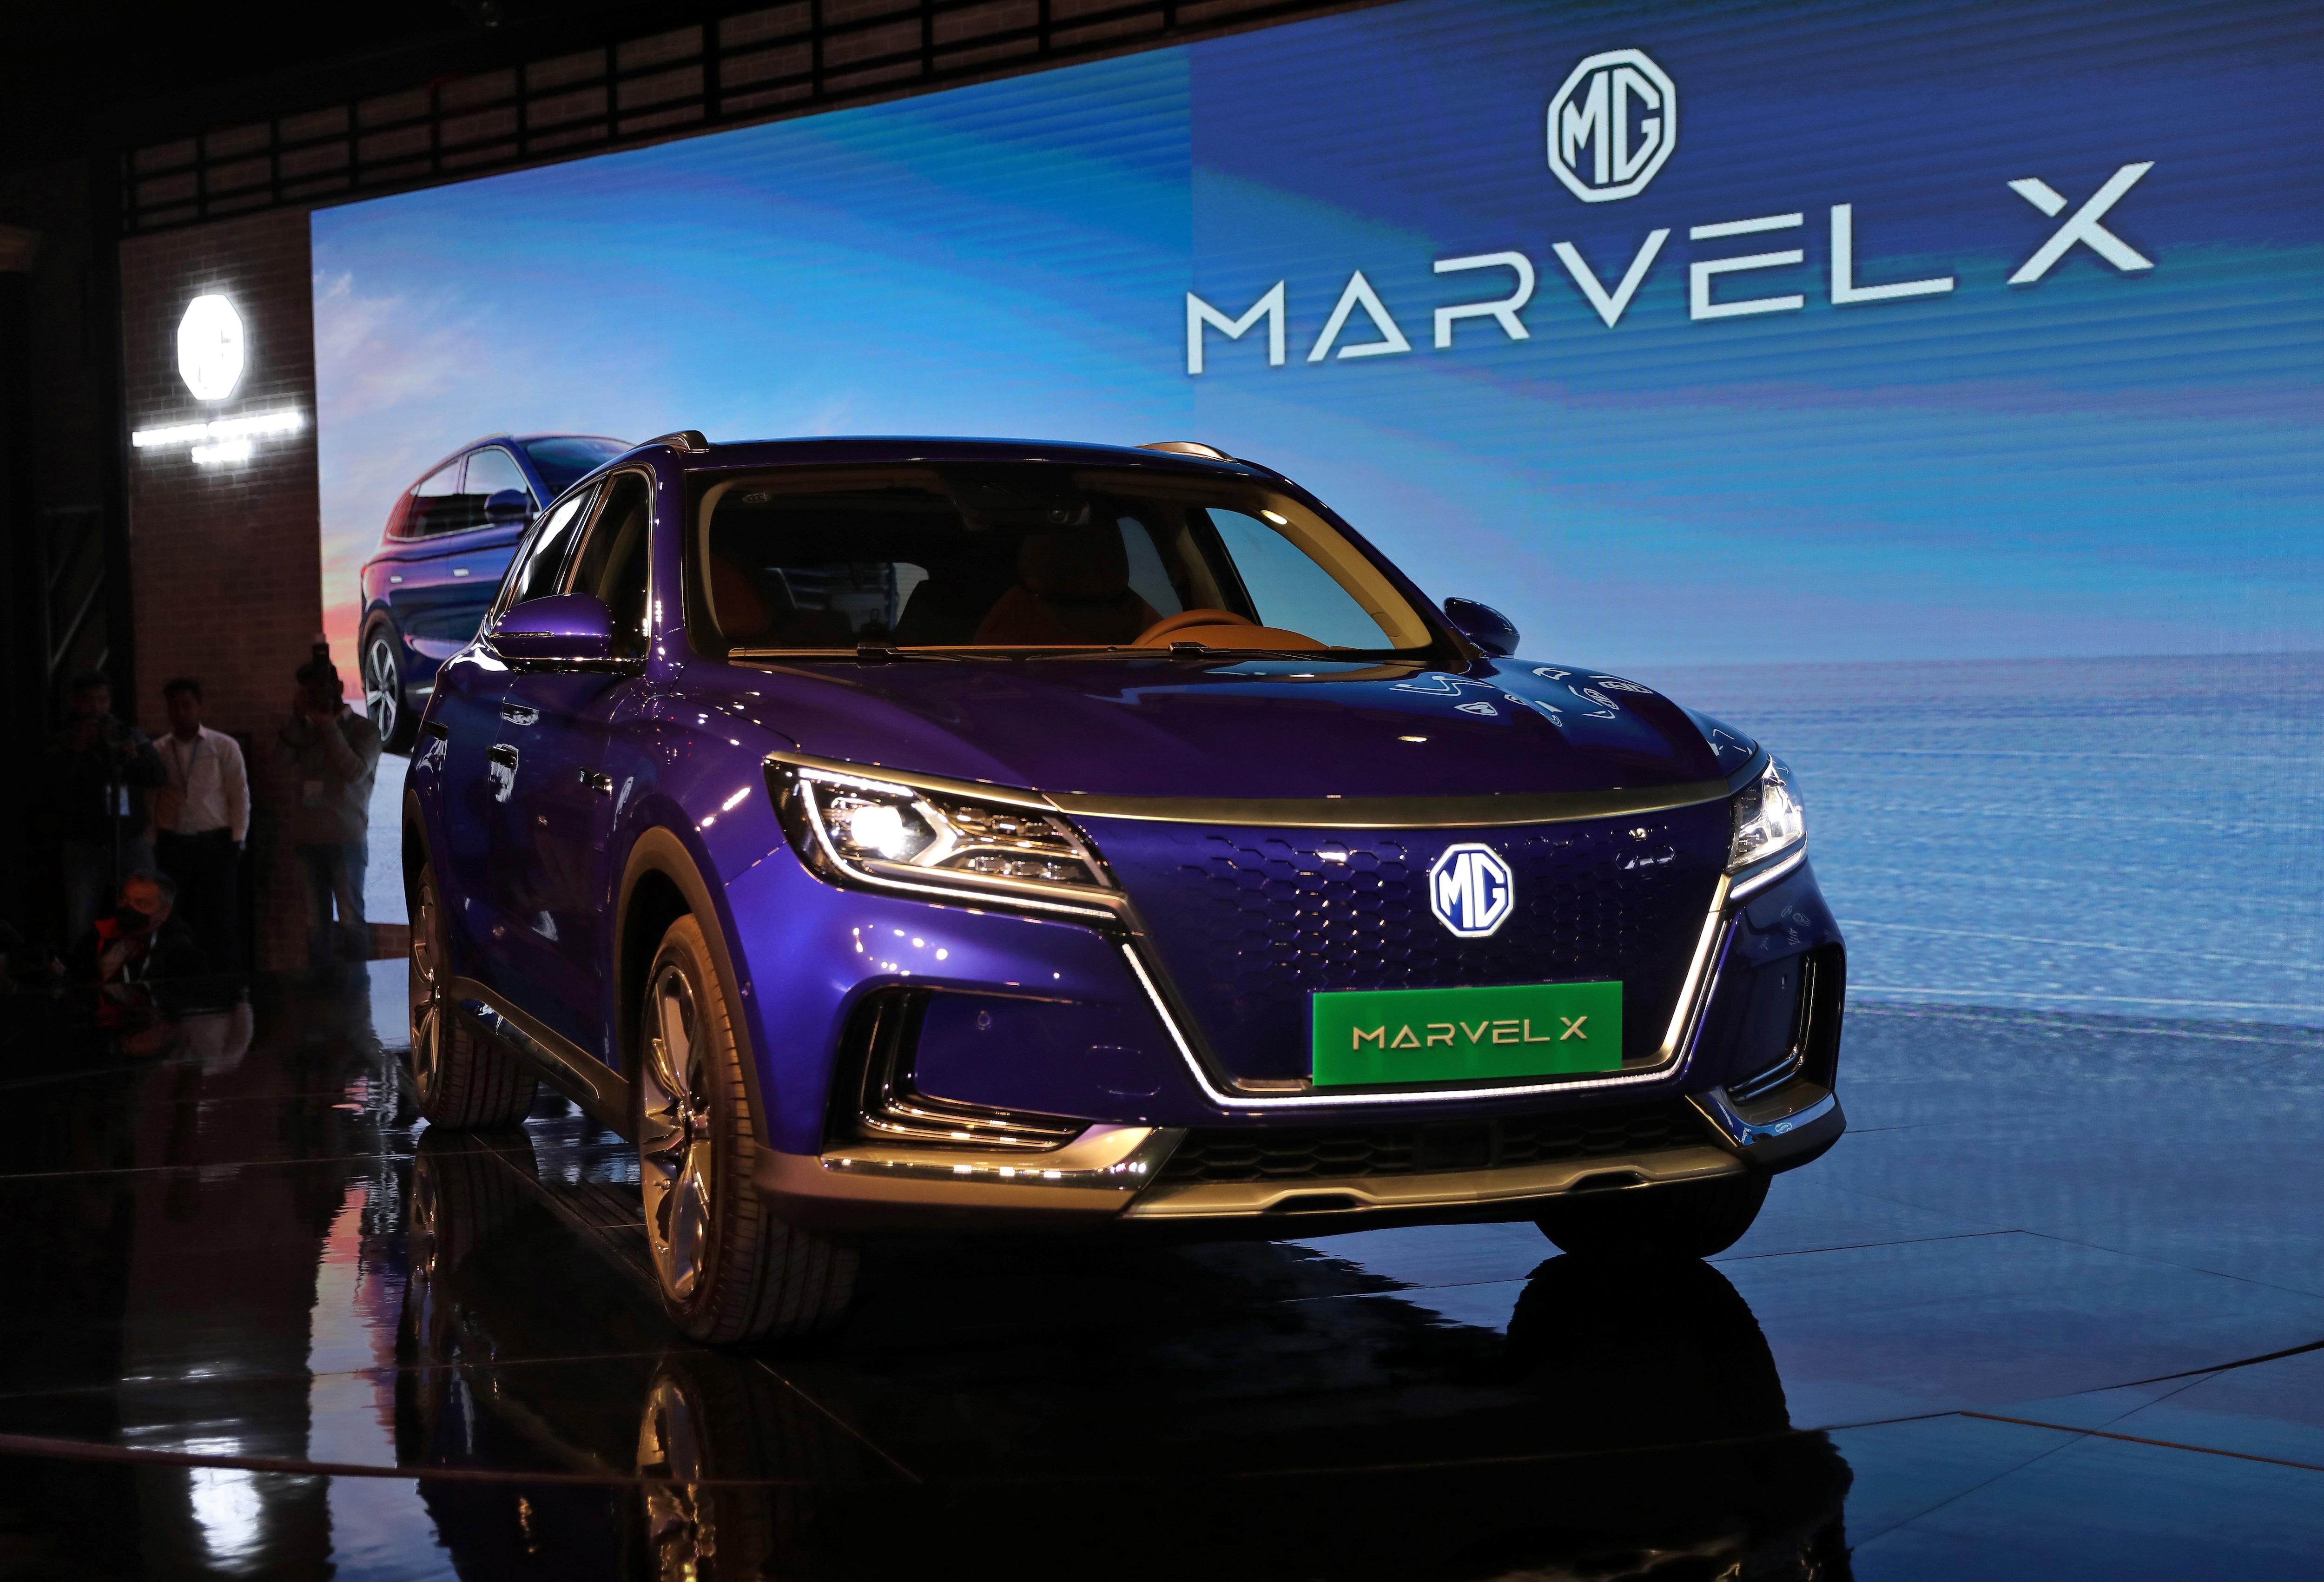 MG Motors Marvel X electric SUV is on display after it was unveiled at the India Auto Expo 2020.